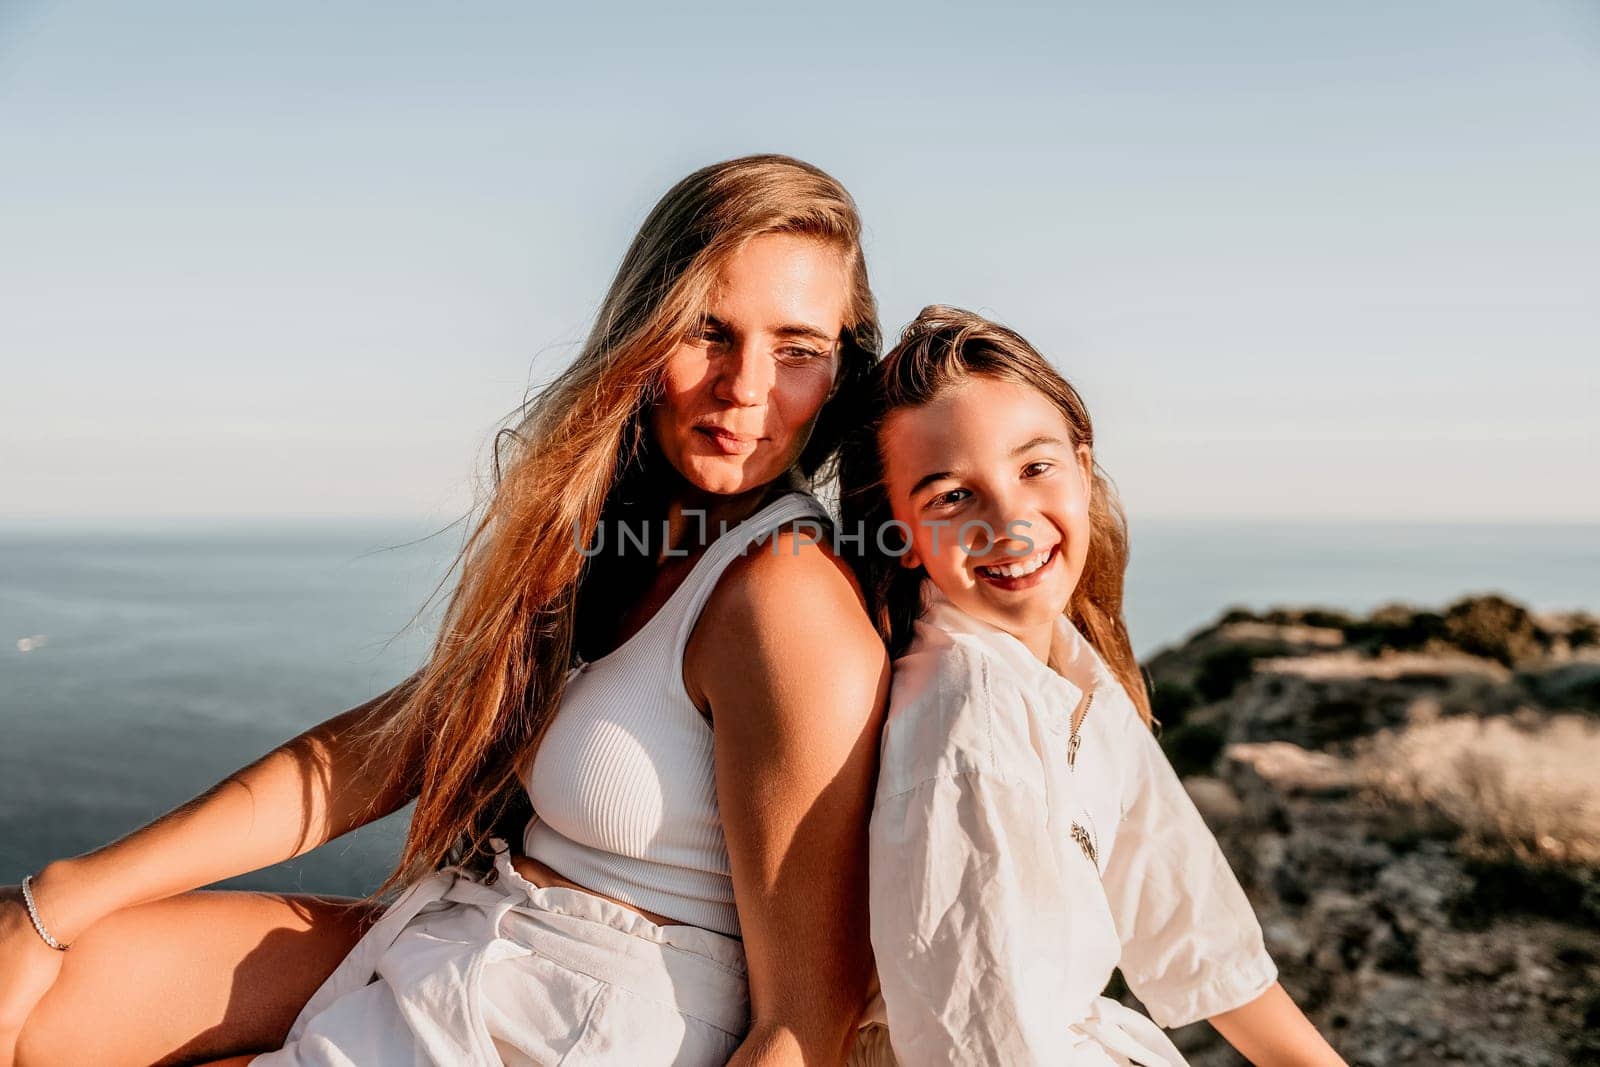 Sea family vacation together, happy mom and teenage daughter hugging and smiling together over sunset sea view. Beautiful woman with long hair relaxing with her child. Concept of happy friendly family. by panophotograph